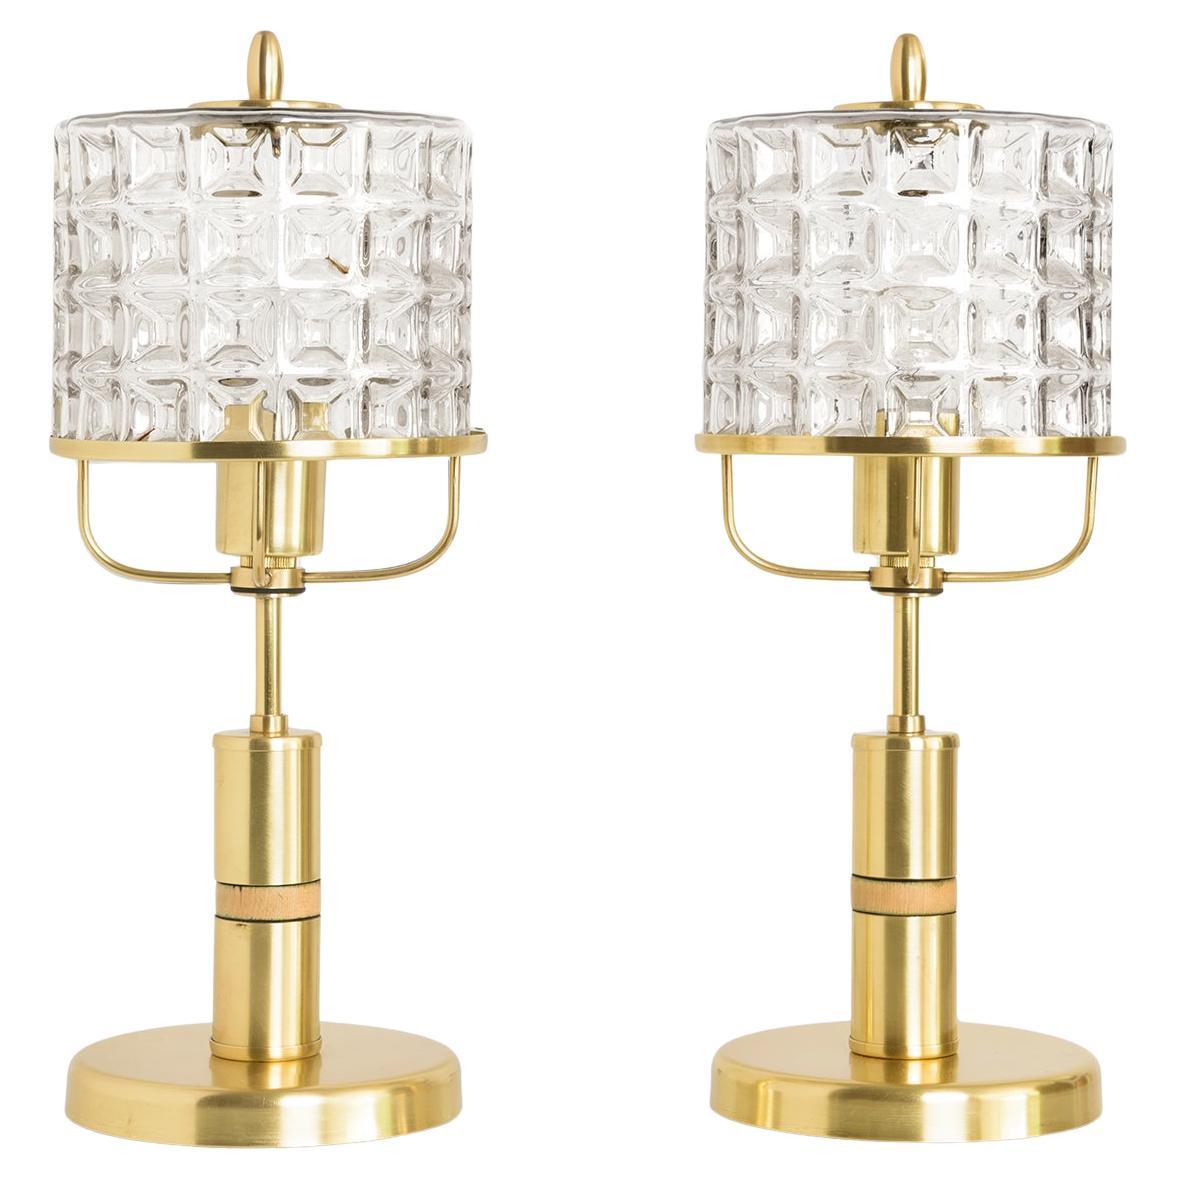 Pair of Kamenicky Senov mid-century Modern table lamps in brass glass shades For Sale